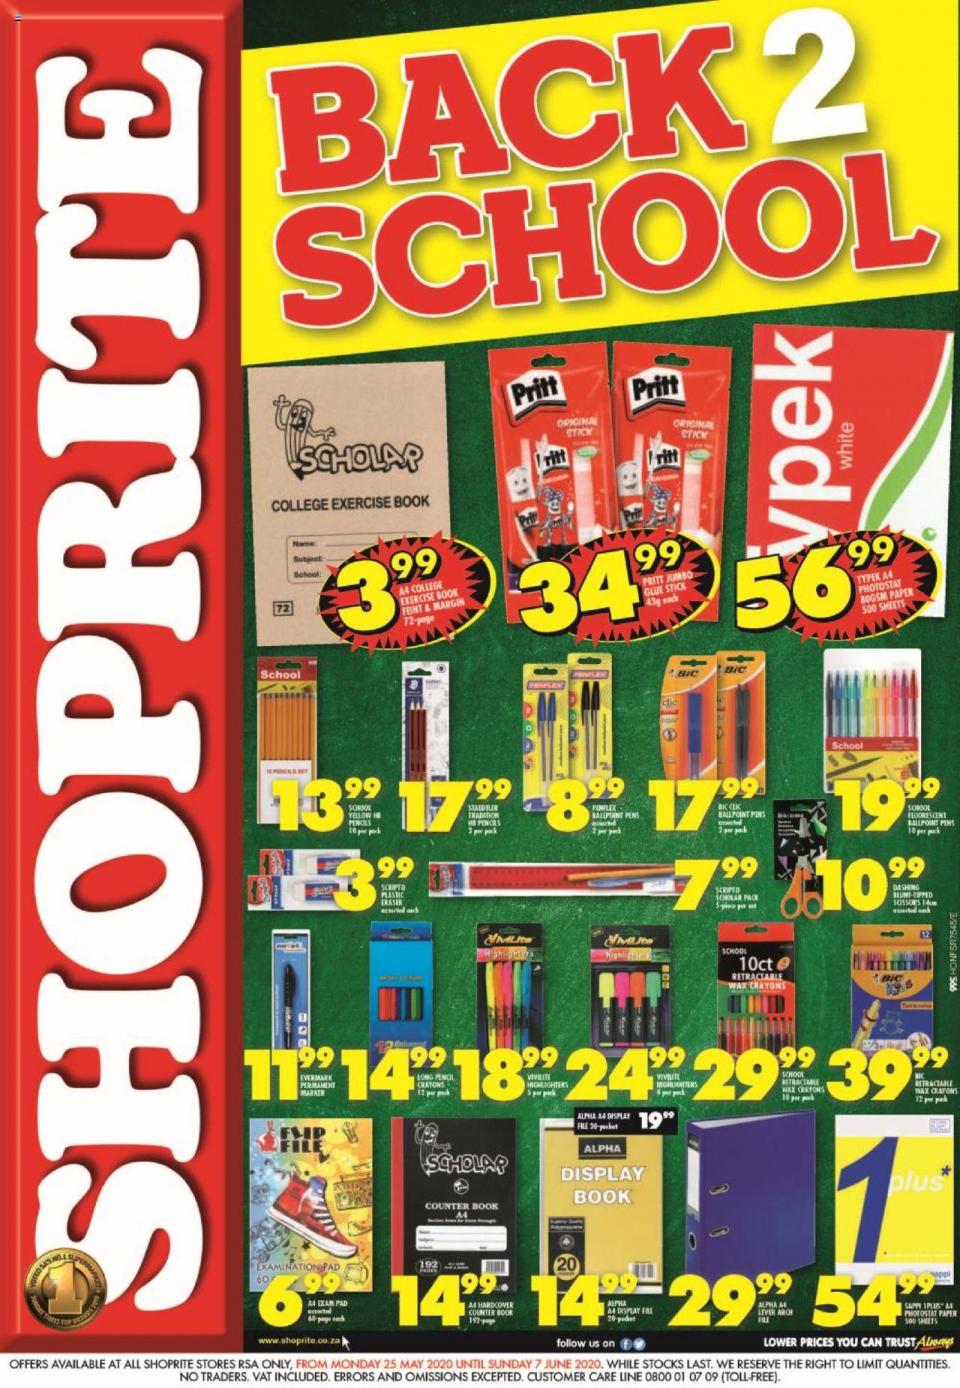 Shoprite Specials Back To School Promotion 25 May 2020